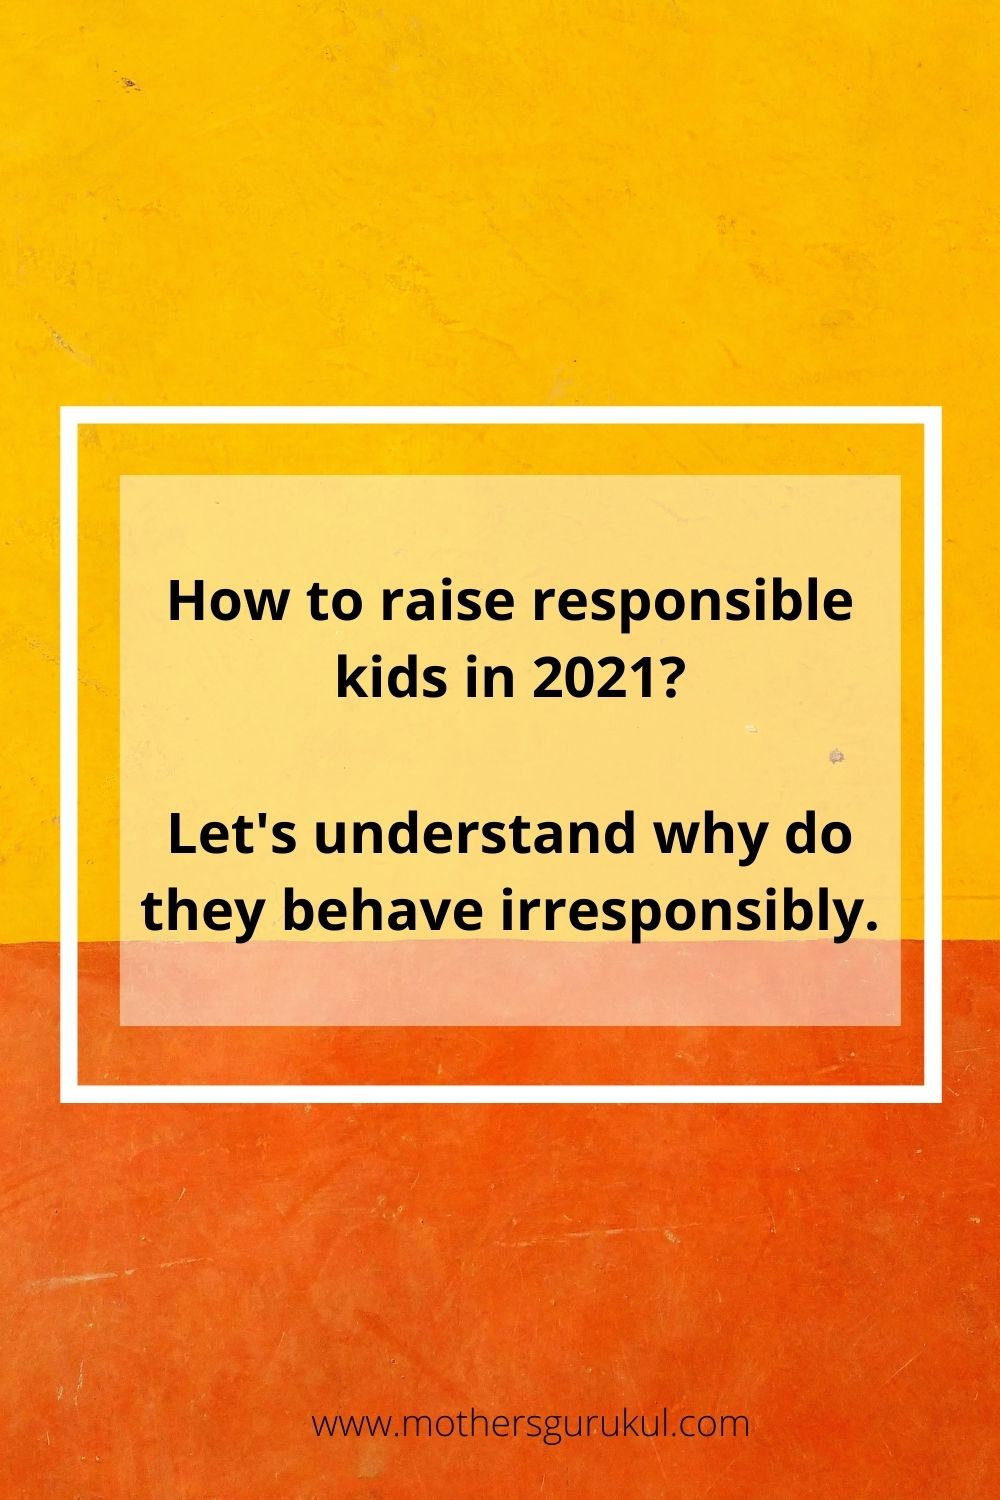 How to raise responsible kids in 2021? Let's understand why do they behave irresponsibly